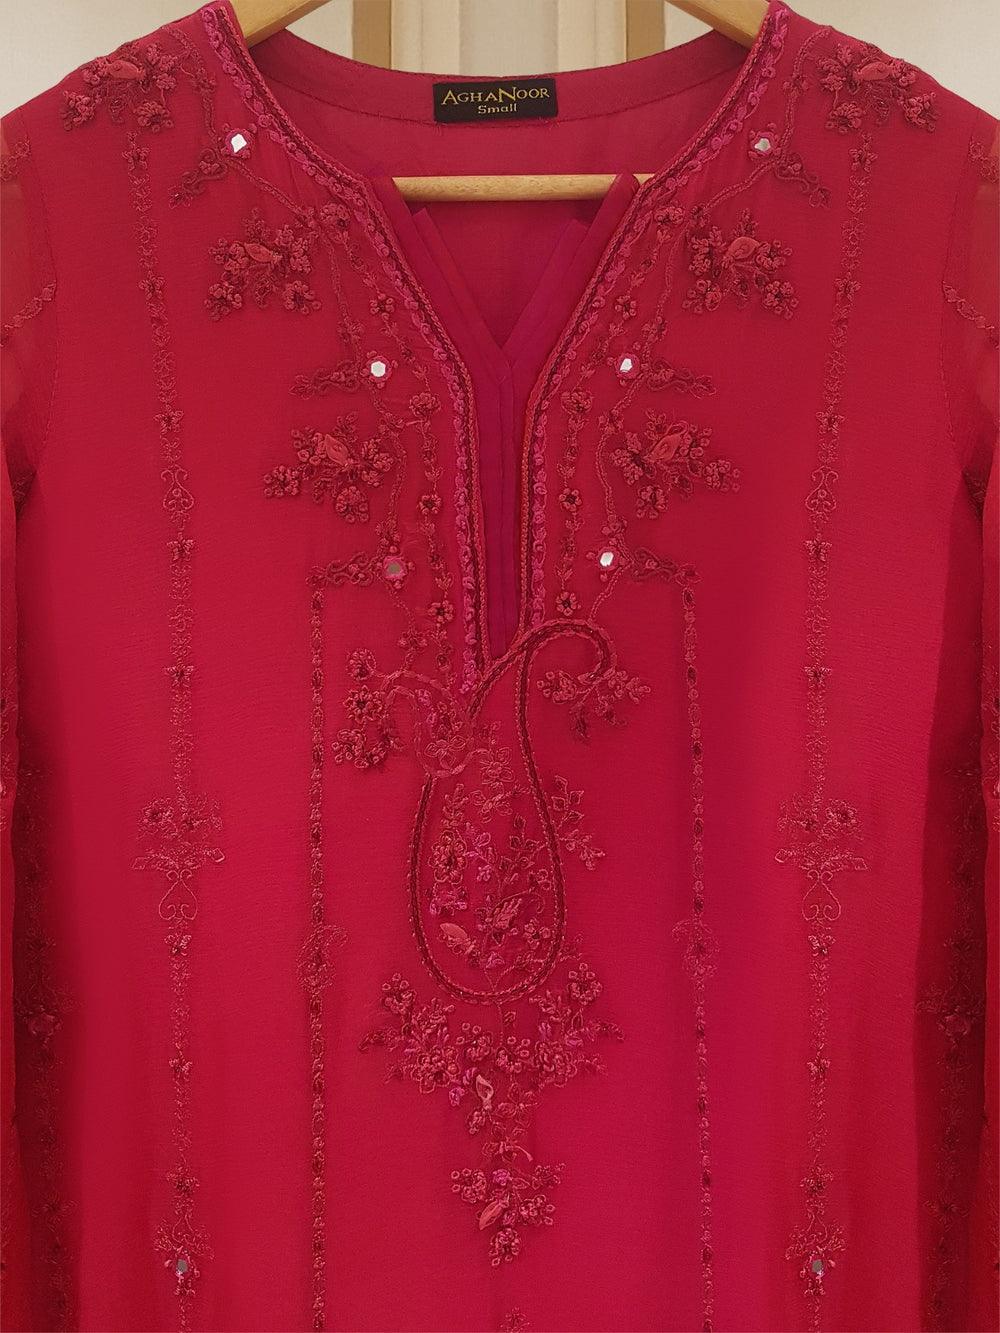 Agha Noor S107259 Pure Chiffon Hand Embroidered Shirt And Pent